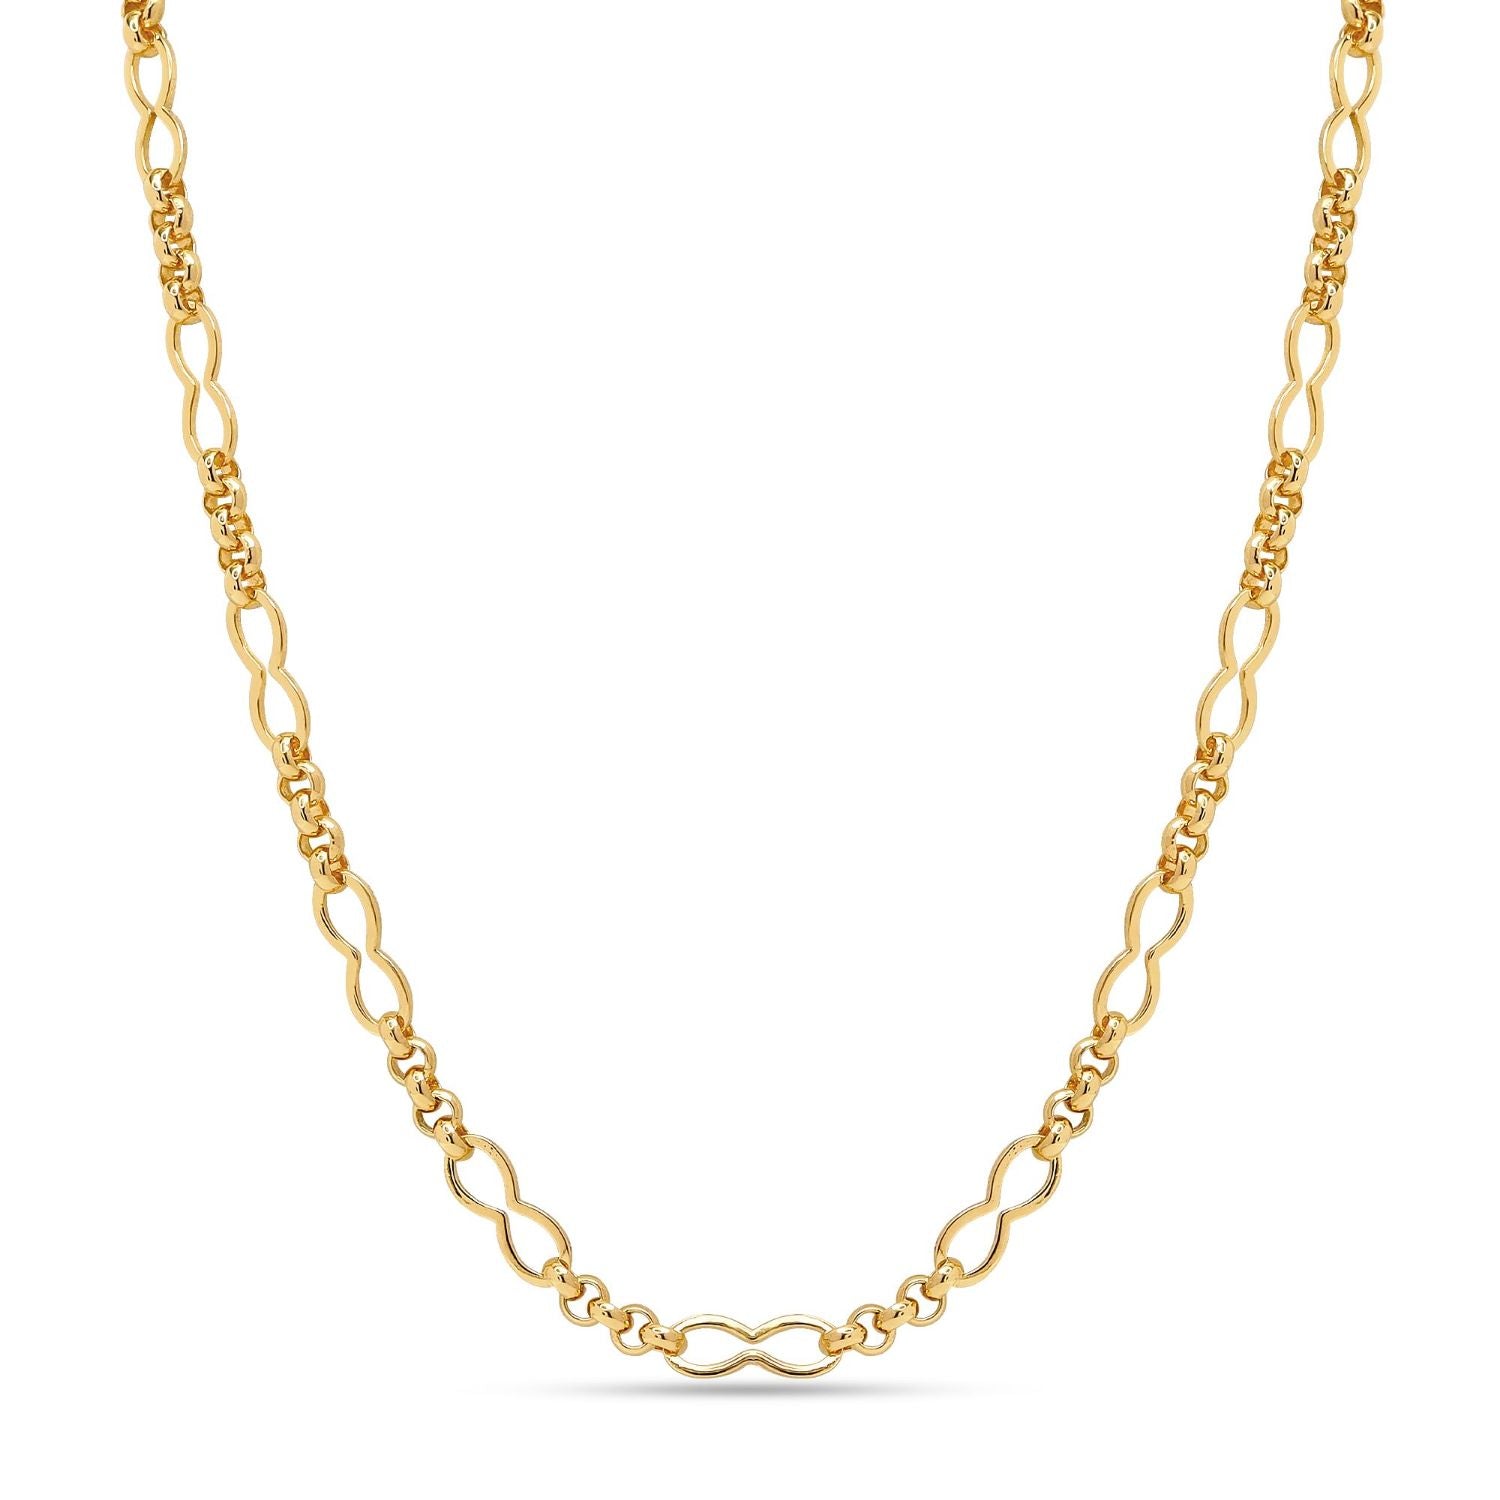 925 Sterling Silver 14K Gold Plated Rolo Link Chain Necklaces for Women Teen